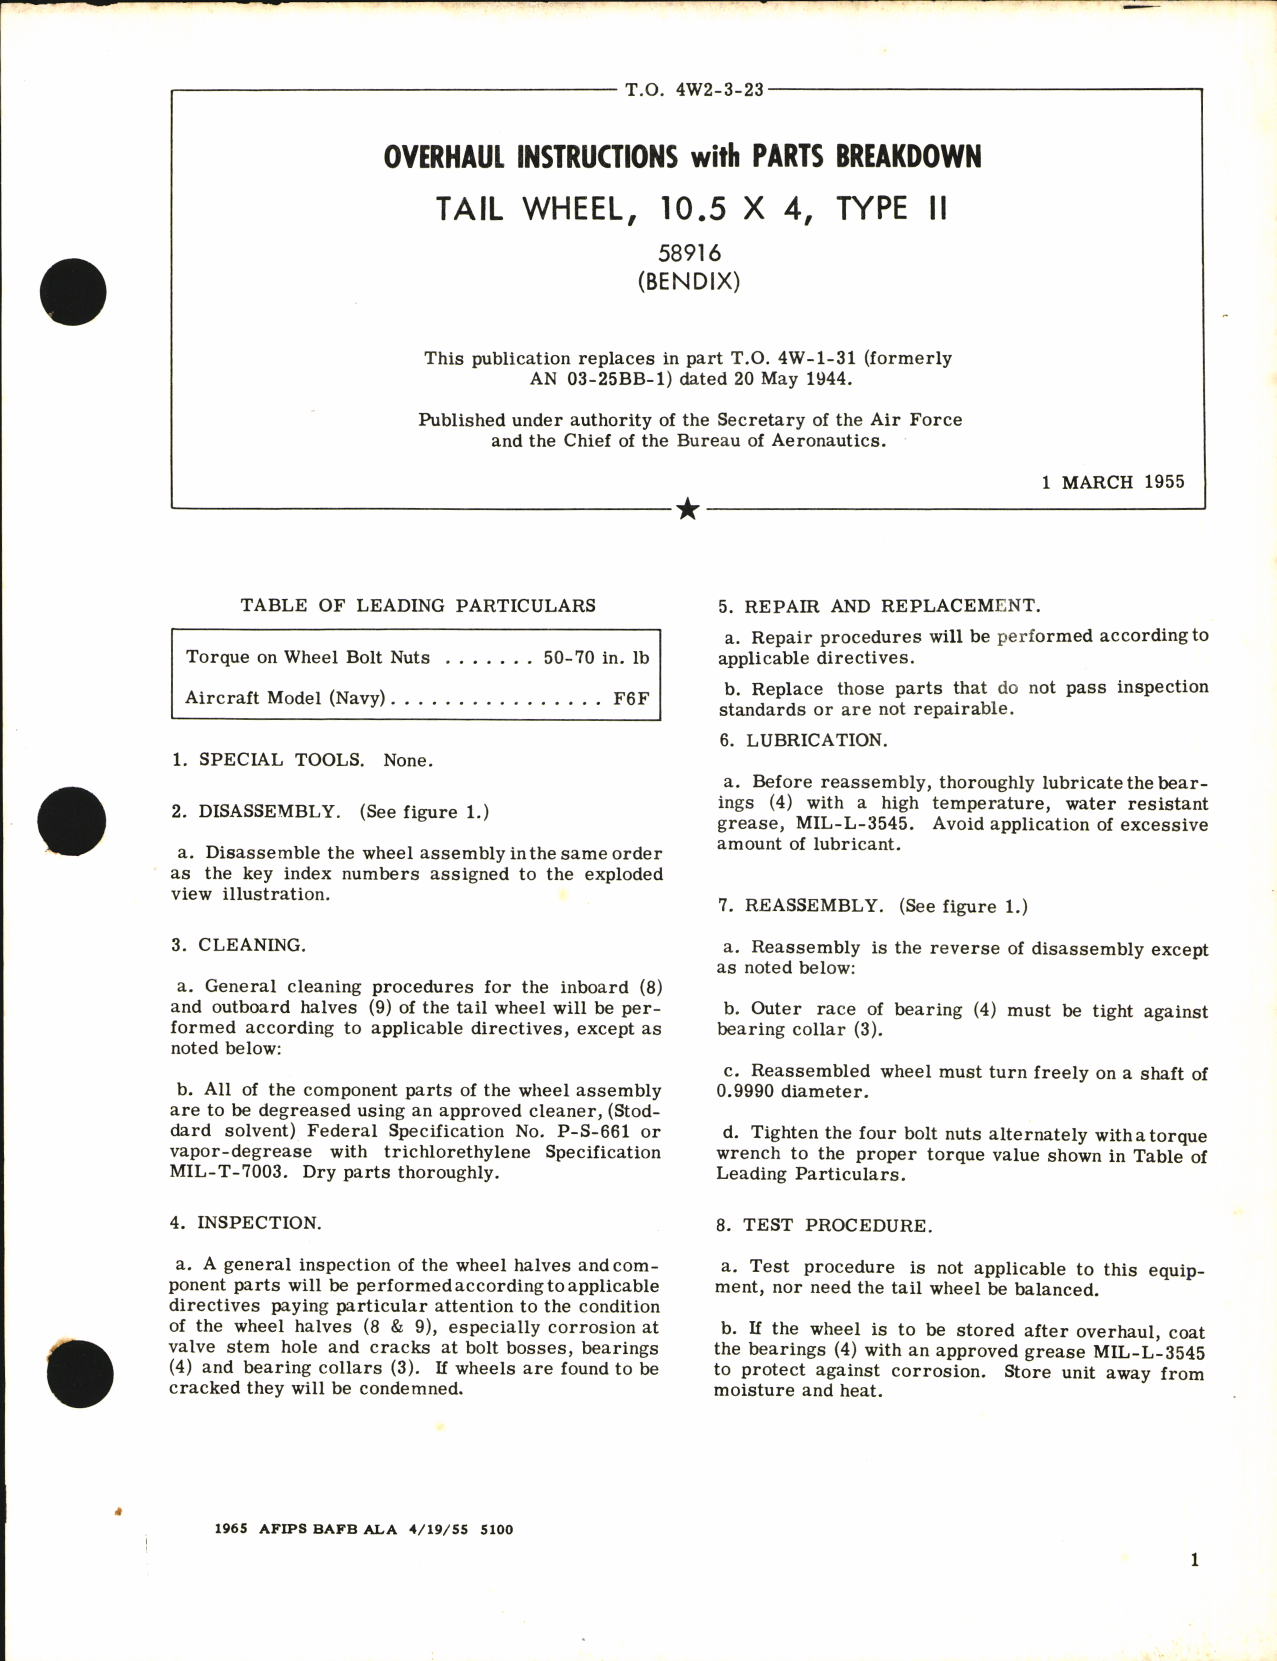 Sample page 1 from AirCorps Library document: Overhaul Instructions with Parts Breakdown for Tail Wheel 10.5 x 4, Type II